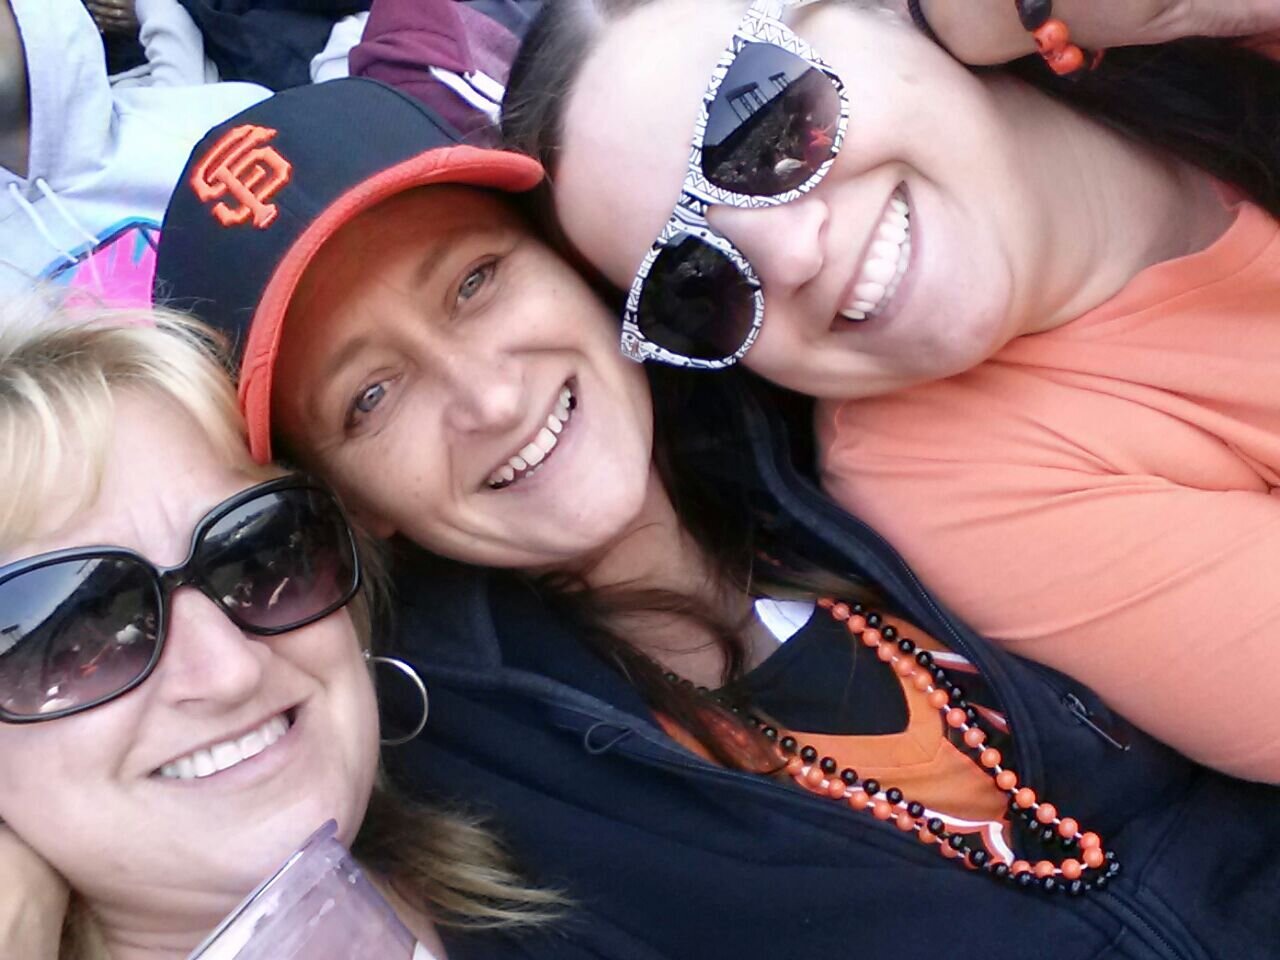 Talk like a truck driver. Speak fluent sarcasm. #SFGiants #NinersAllDay Xanax needs to come in an inhaler. No apologies for anything.